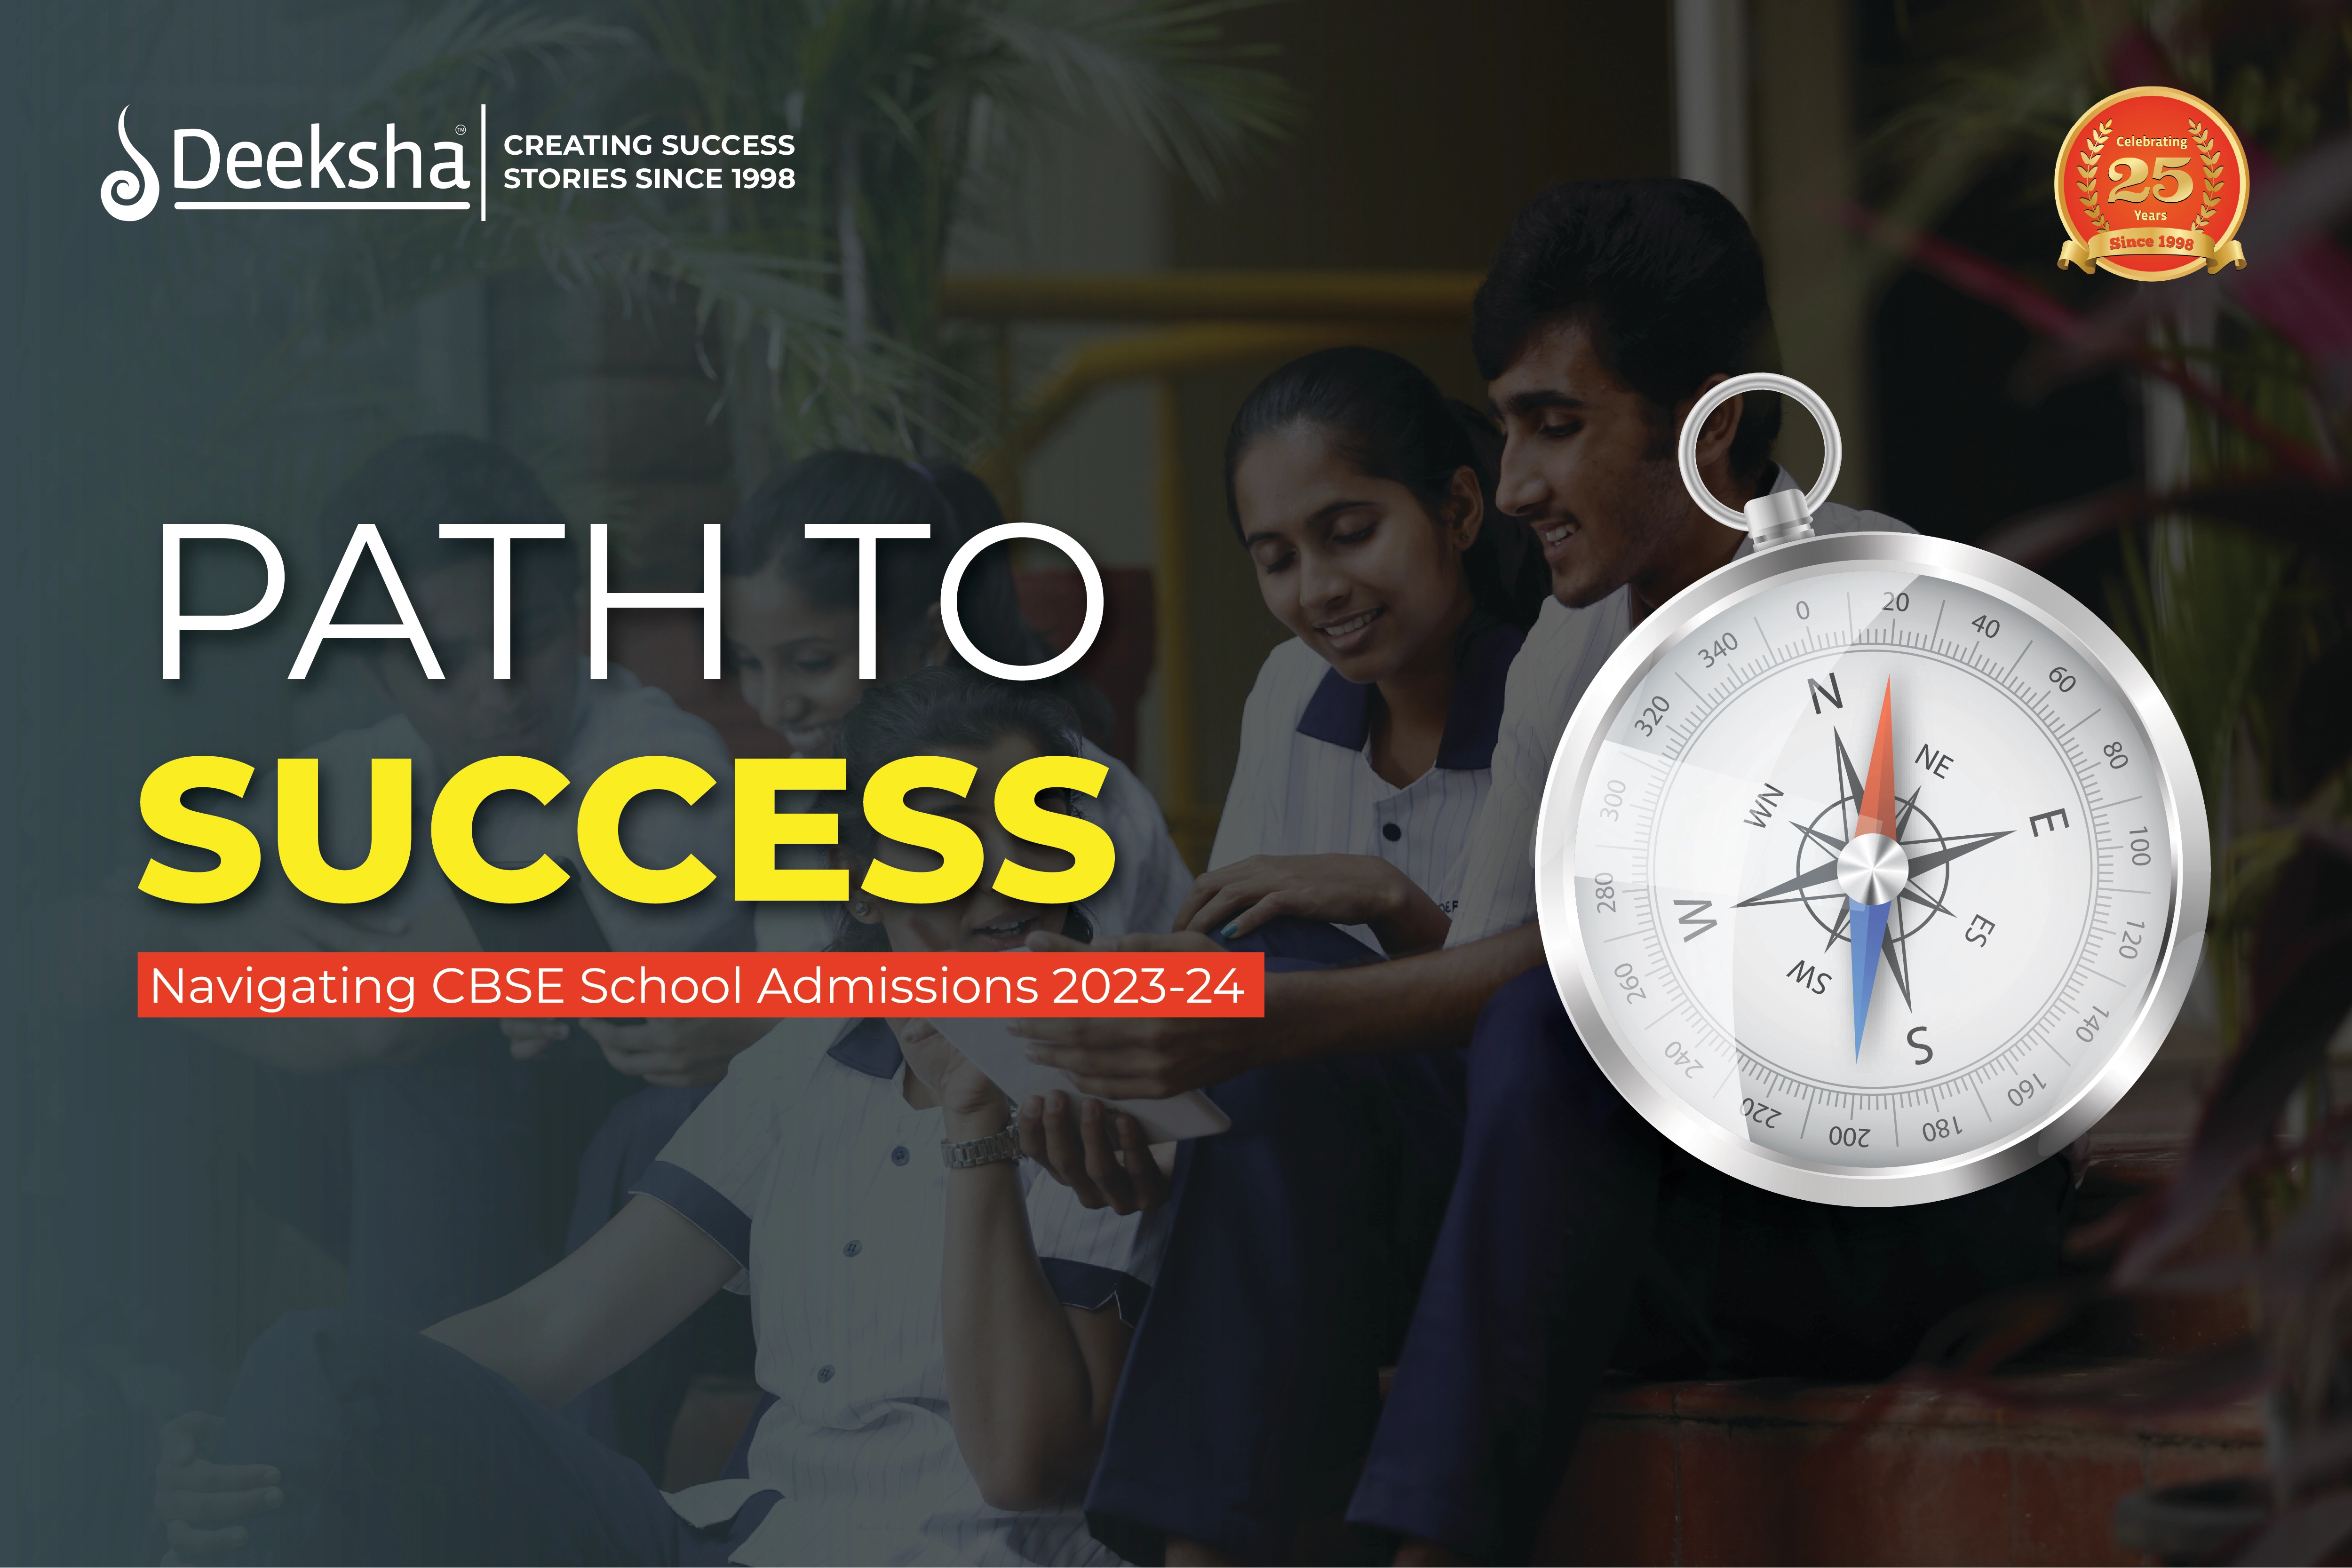 Guidelines for CBSE School Admission 2023-24